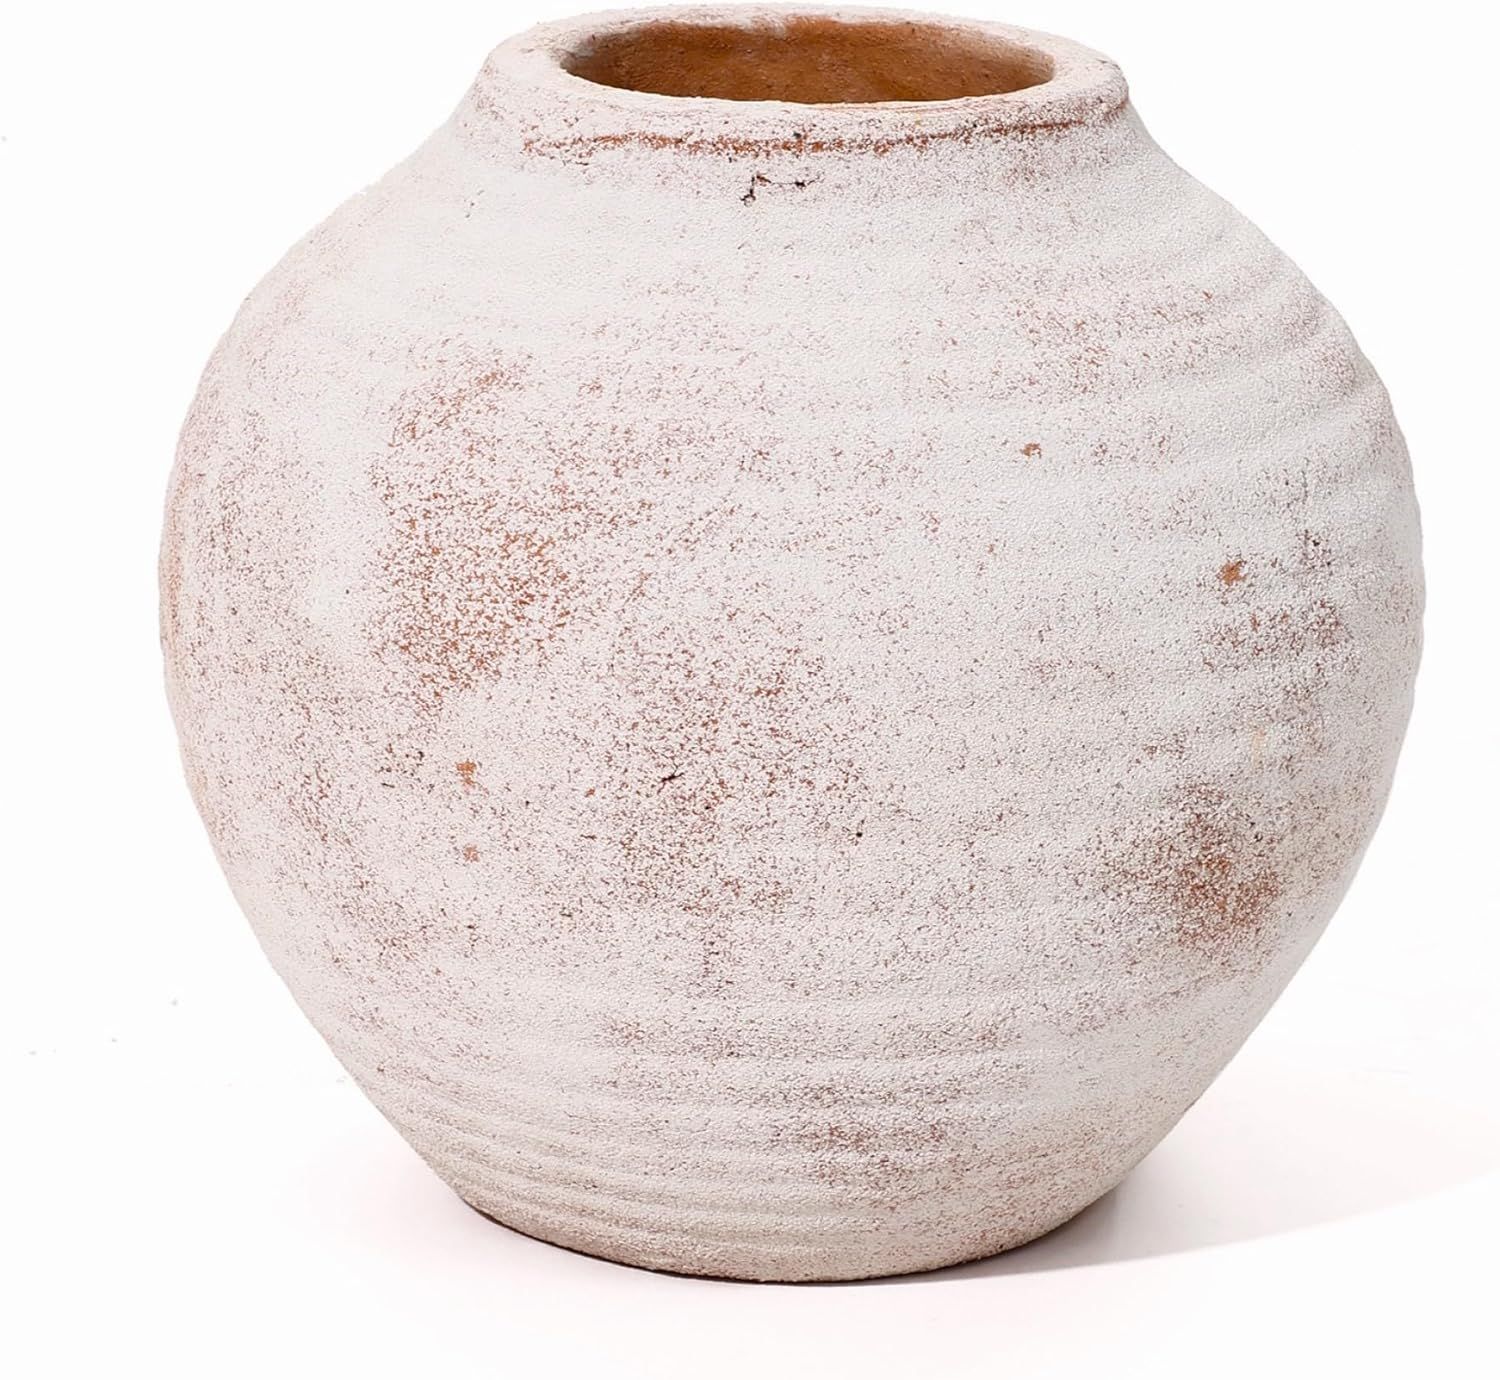 LuxenHome 7.5" Tall Terracotta Vase Marble Textured Brown and White Rustic Vase for Home Decor En... | Amazon (US)